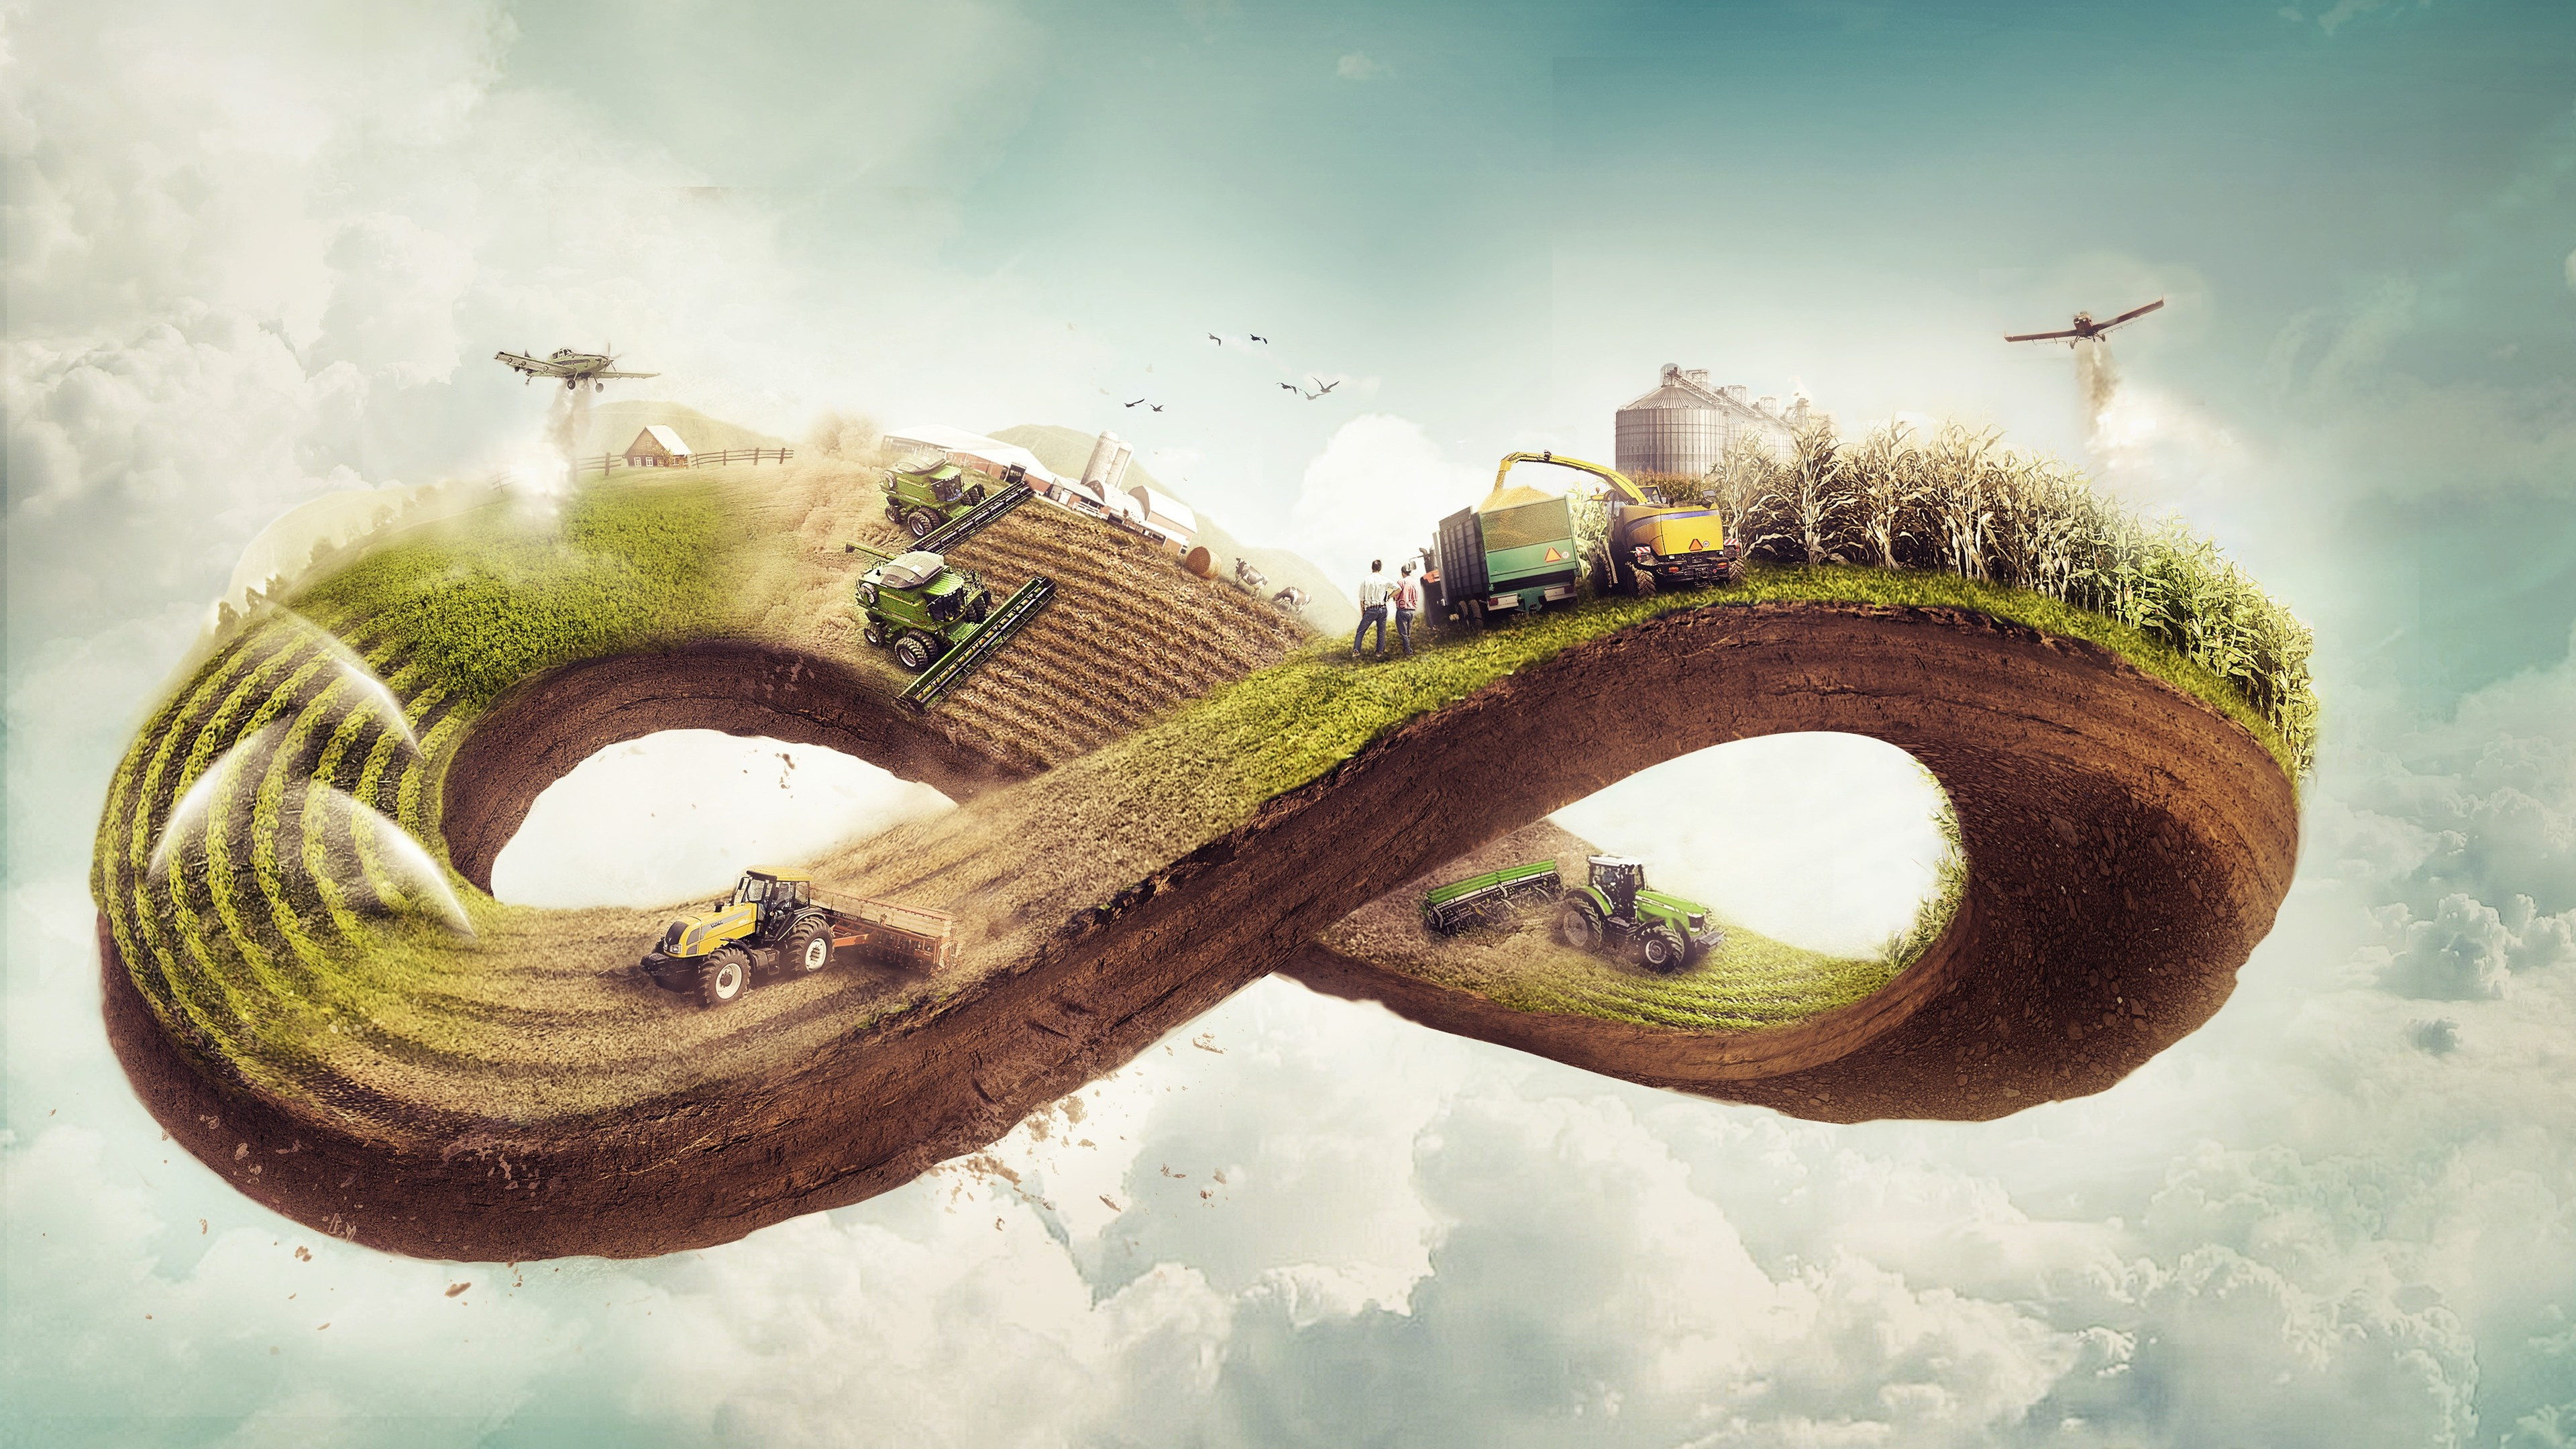 Farm: Agriculture, Farming, Cultivation of the soil for the growing of crops. 3840x2160 4K Wallpaper.